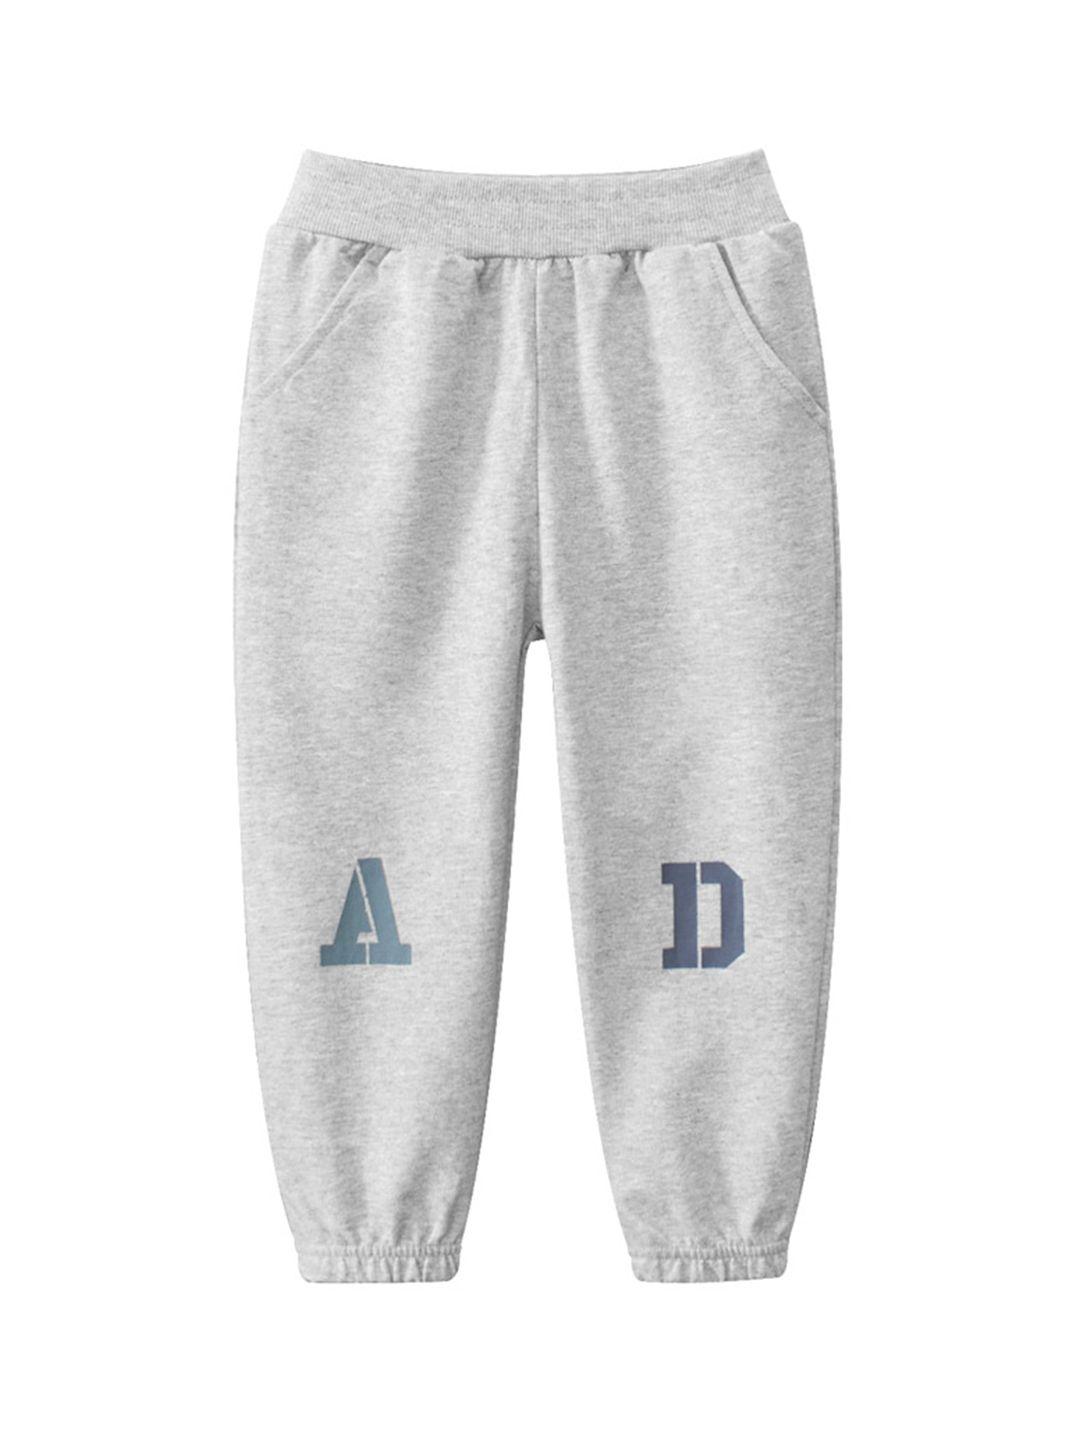 stylecast boys grey printed easy wash cotton joggers